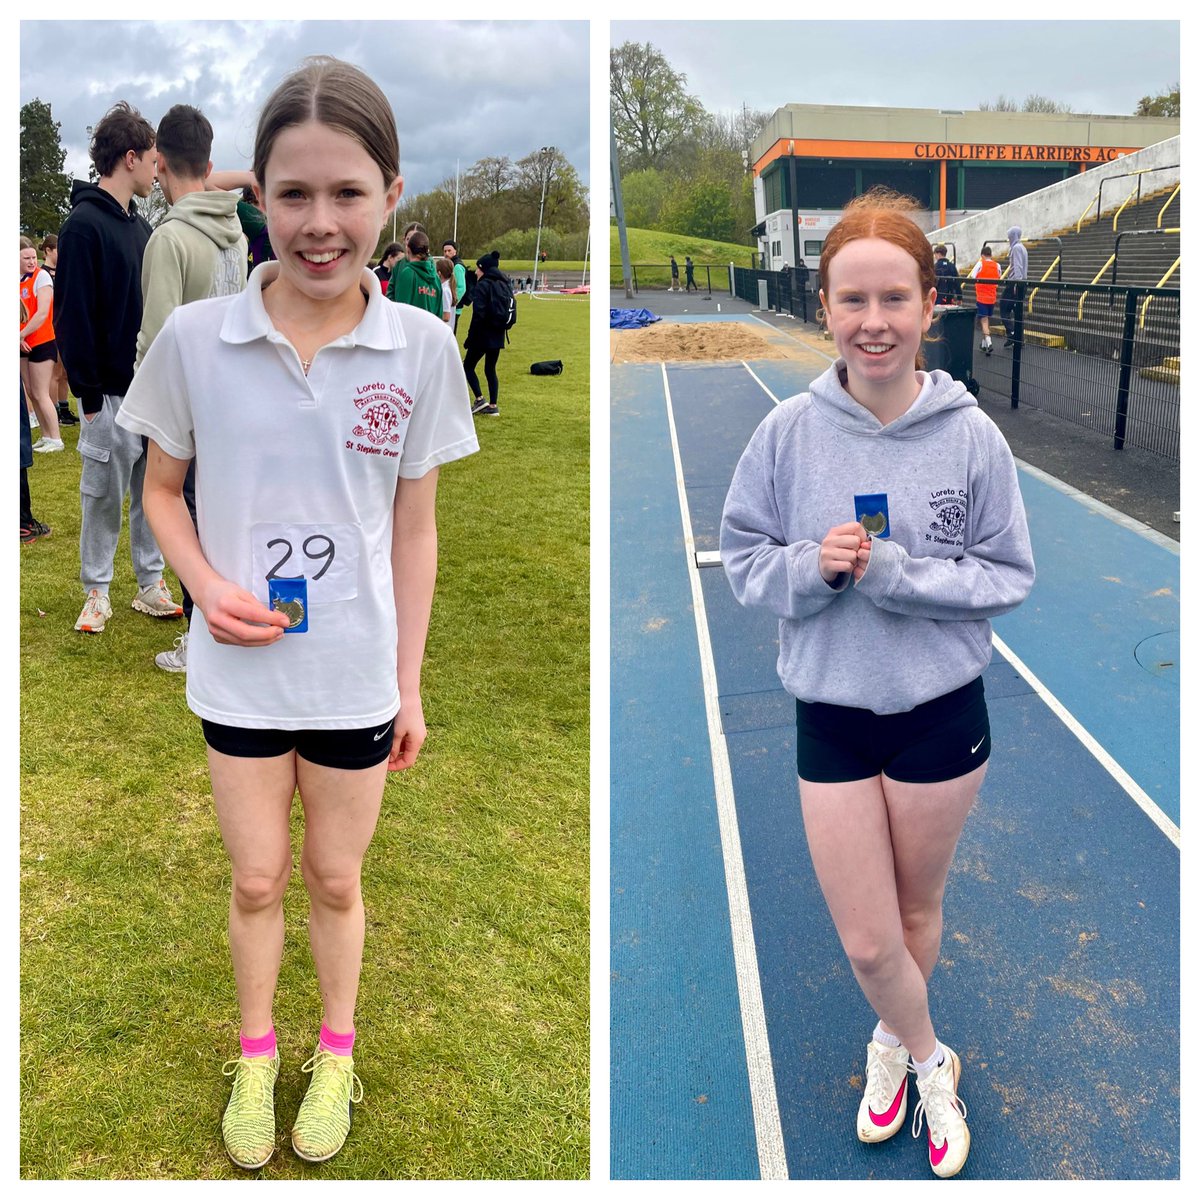 CONGRATS to our athletes on top finishes at East Leinster’s w/5 qualifying for Leinsters!* Sen: J Cleary-1st 3000m* K OSullivan-6th Javelin Inter: L Clarke-3rd 800m* L DeBurca-6th 800m Jun: J Timlin-3rd High Jump* O Lacy-6th 200m Min: C Beddy-1st 800m* E O’Farrell-2nd Long Jump*